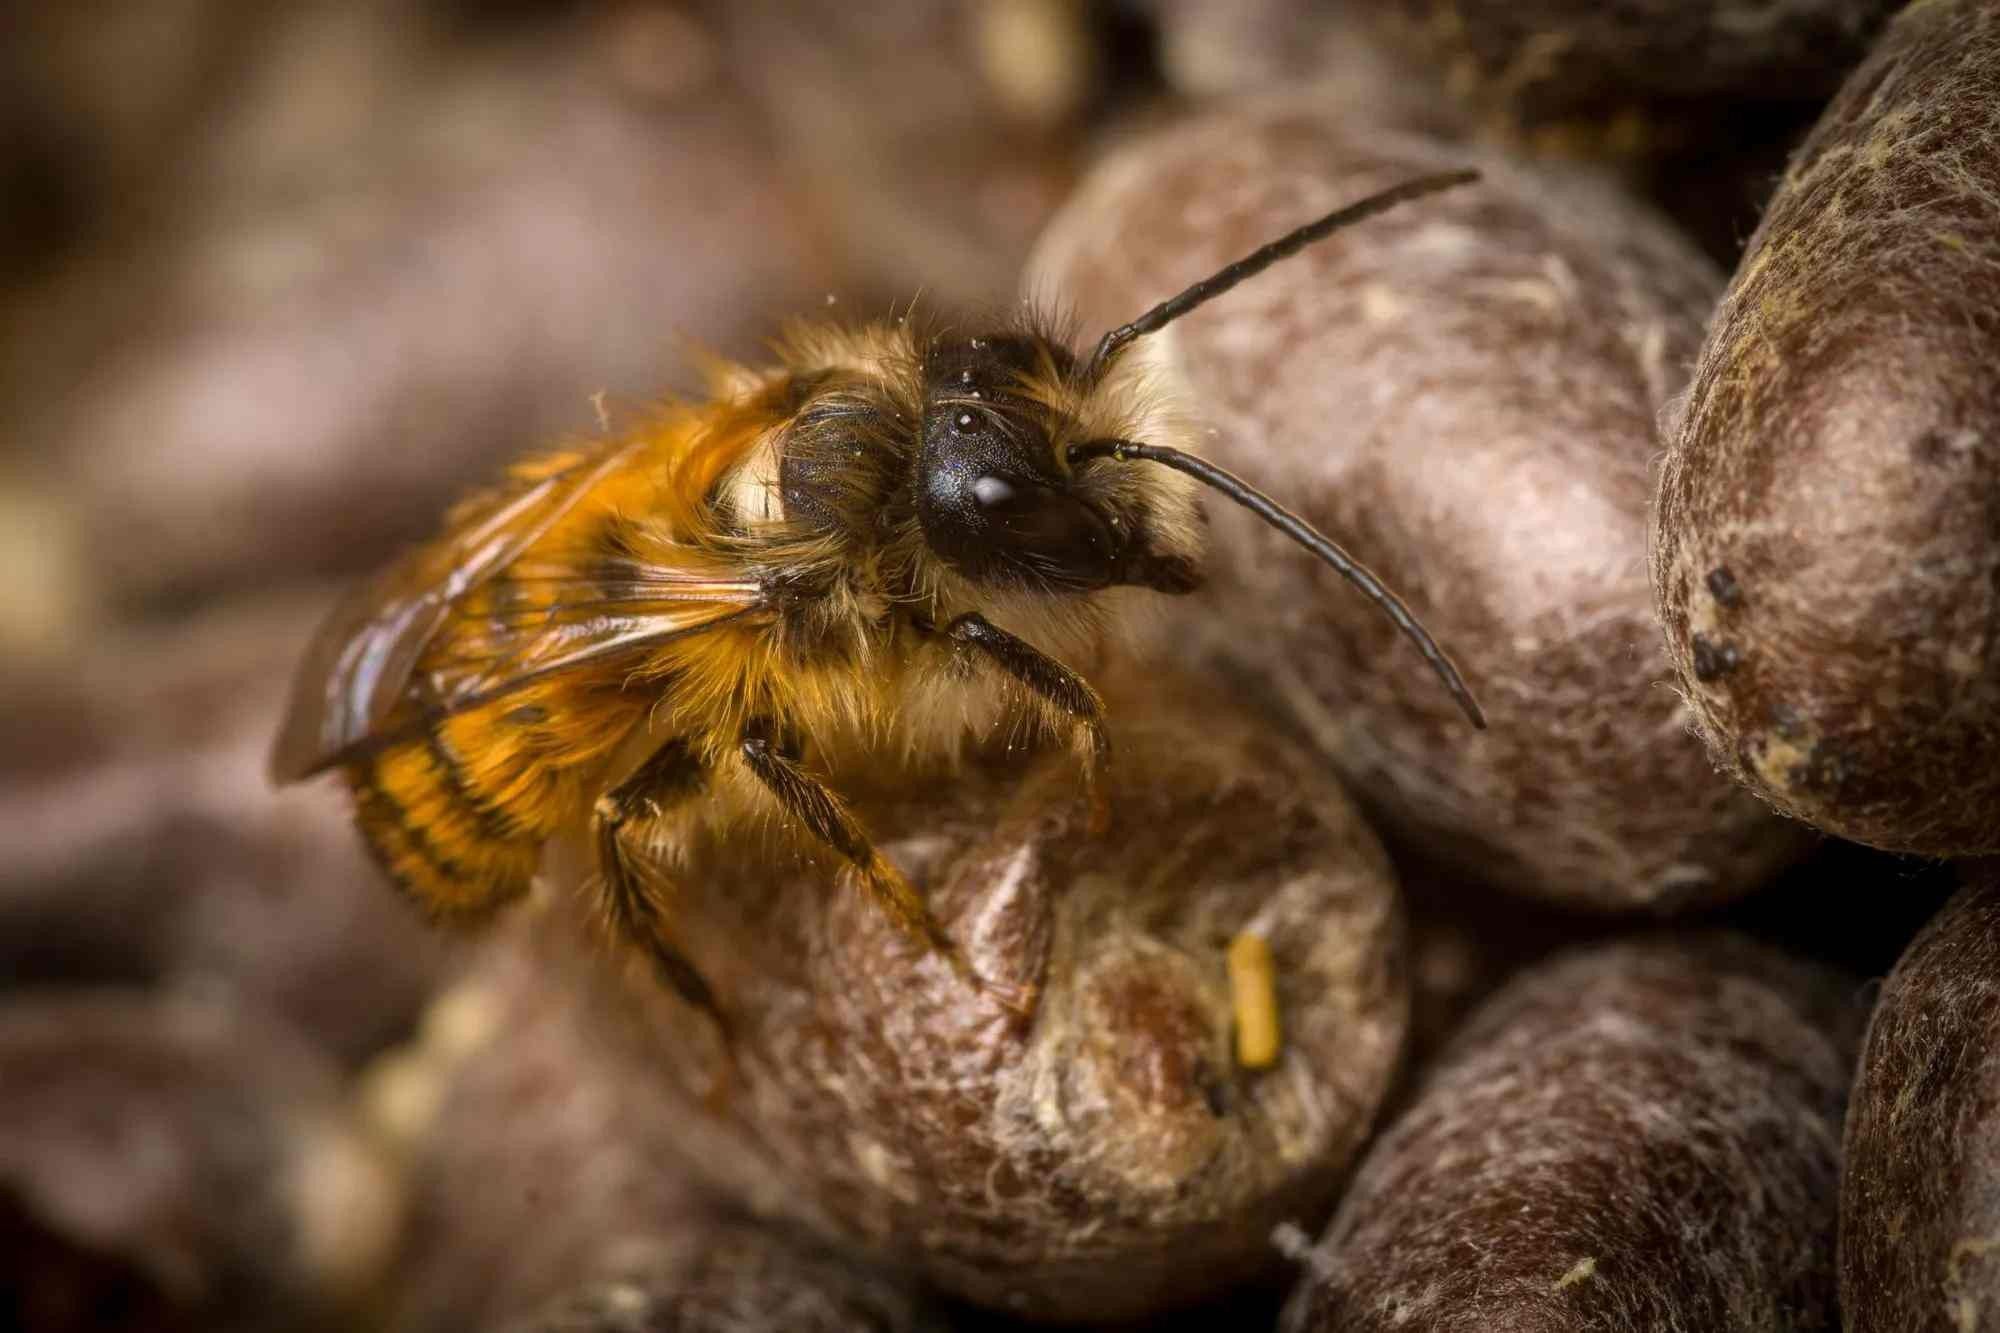 Facts about the characteristics of red-mason bees.